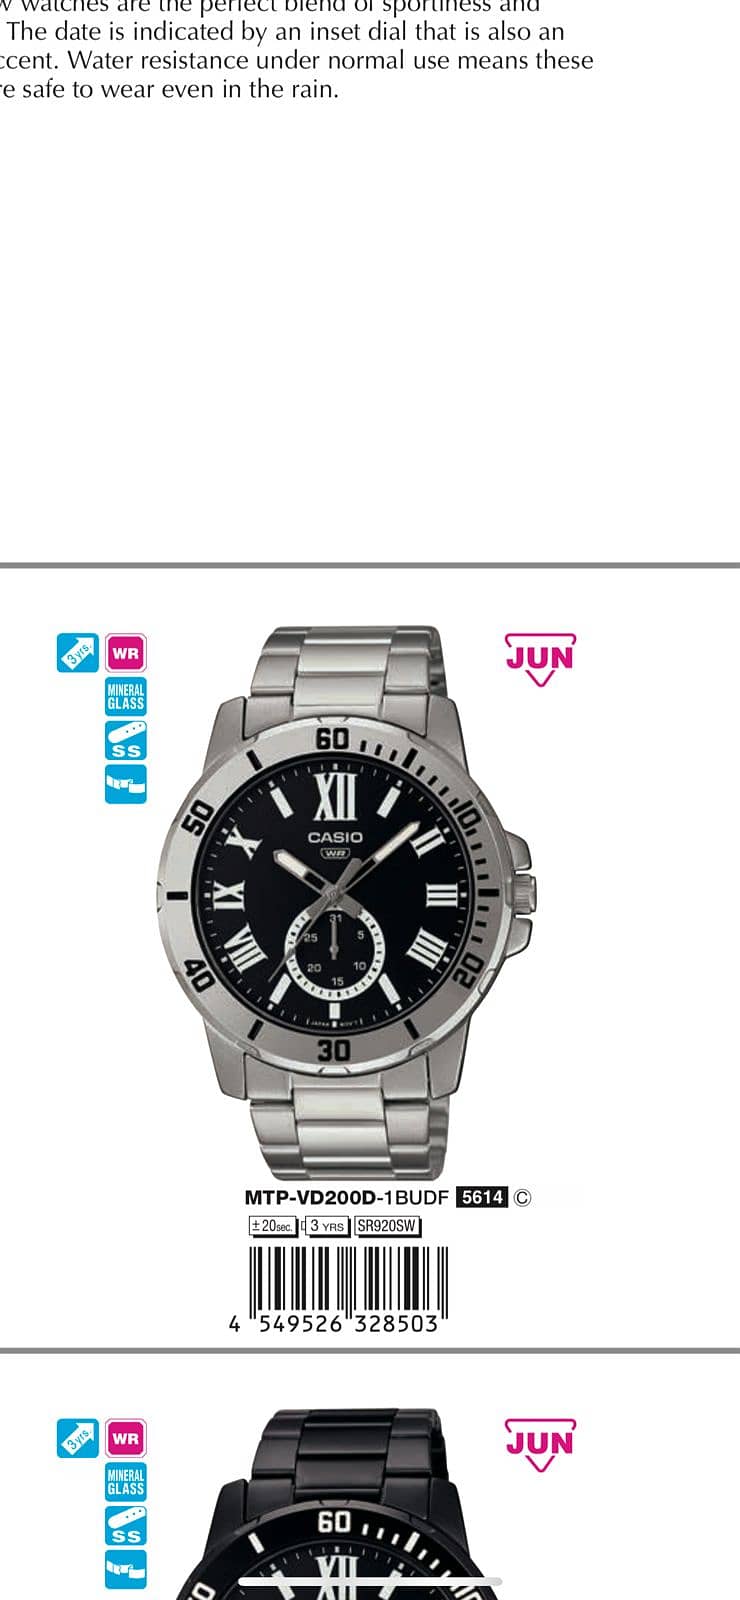 Casio watches on discounted prices 8